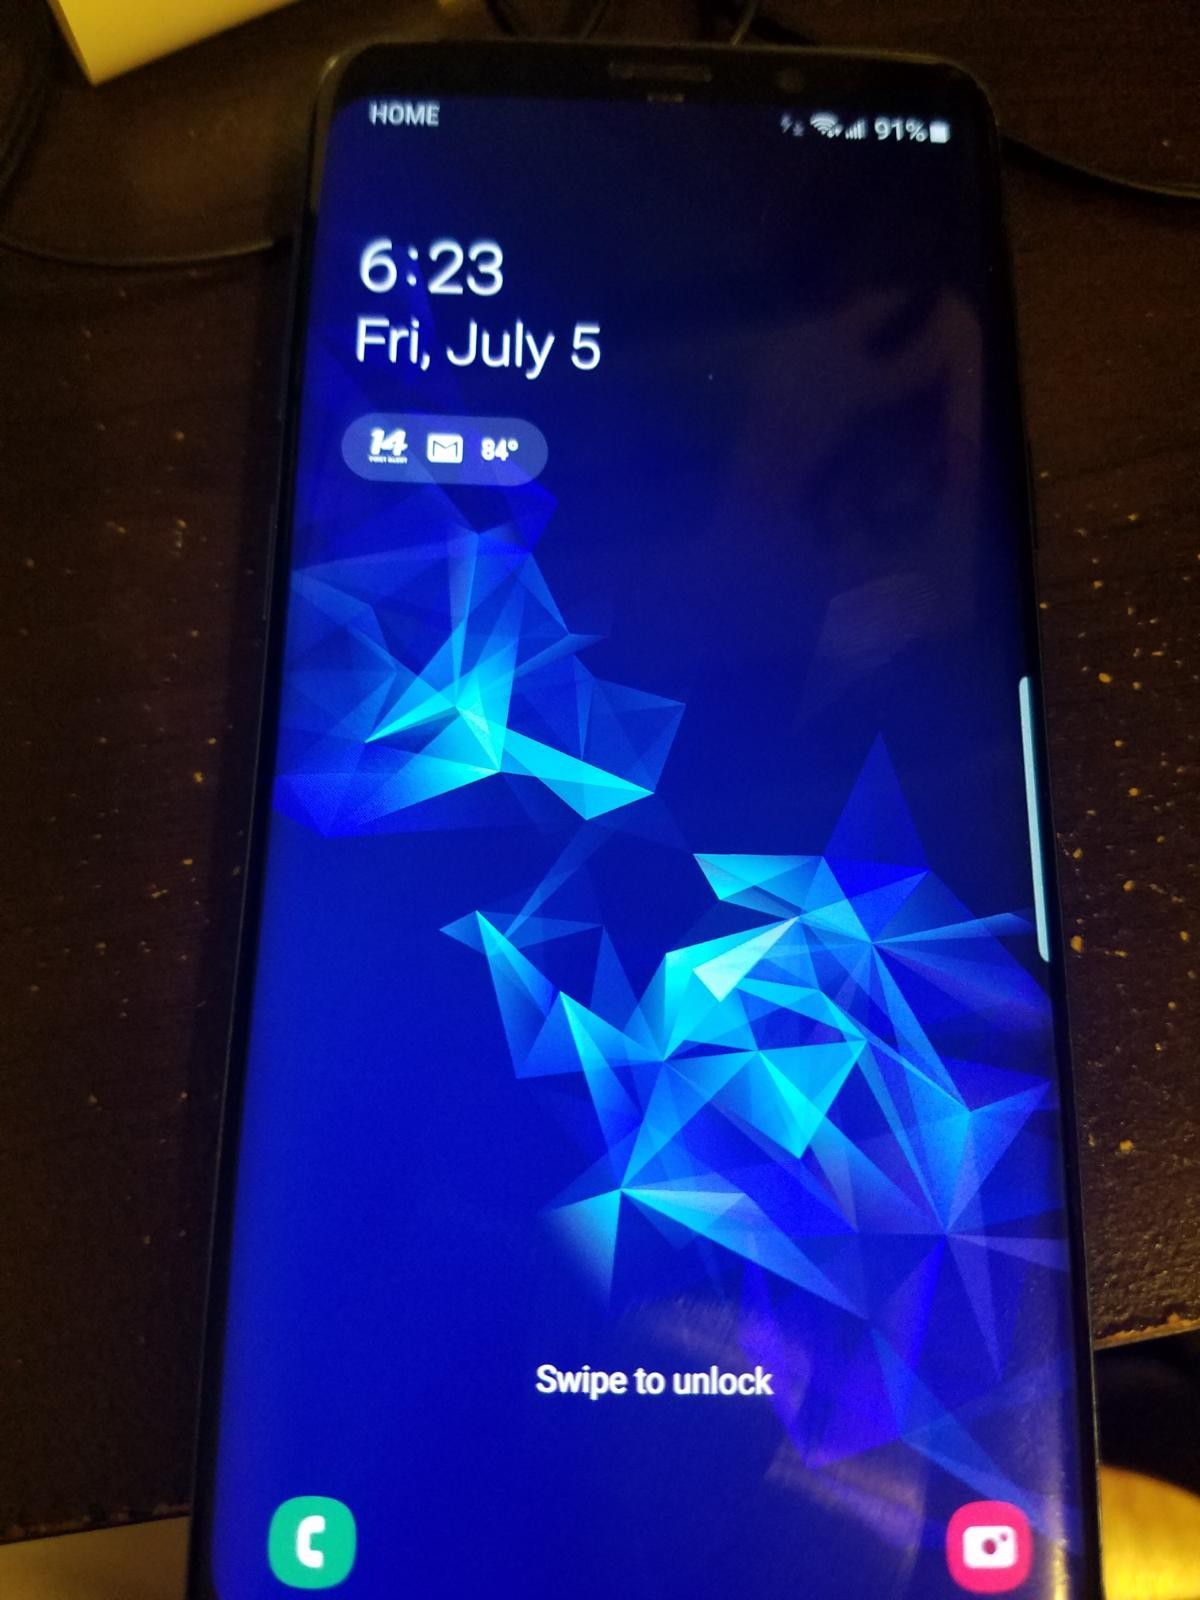 Galaxy s9 unlocked trade for an att iPhone 8 plus or higher